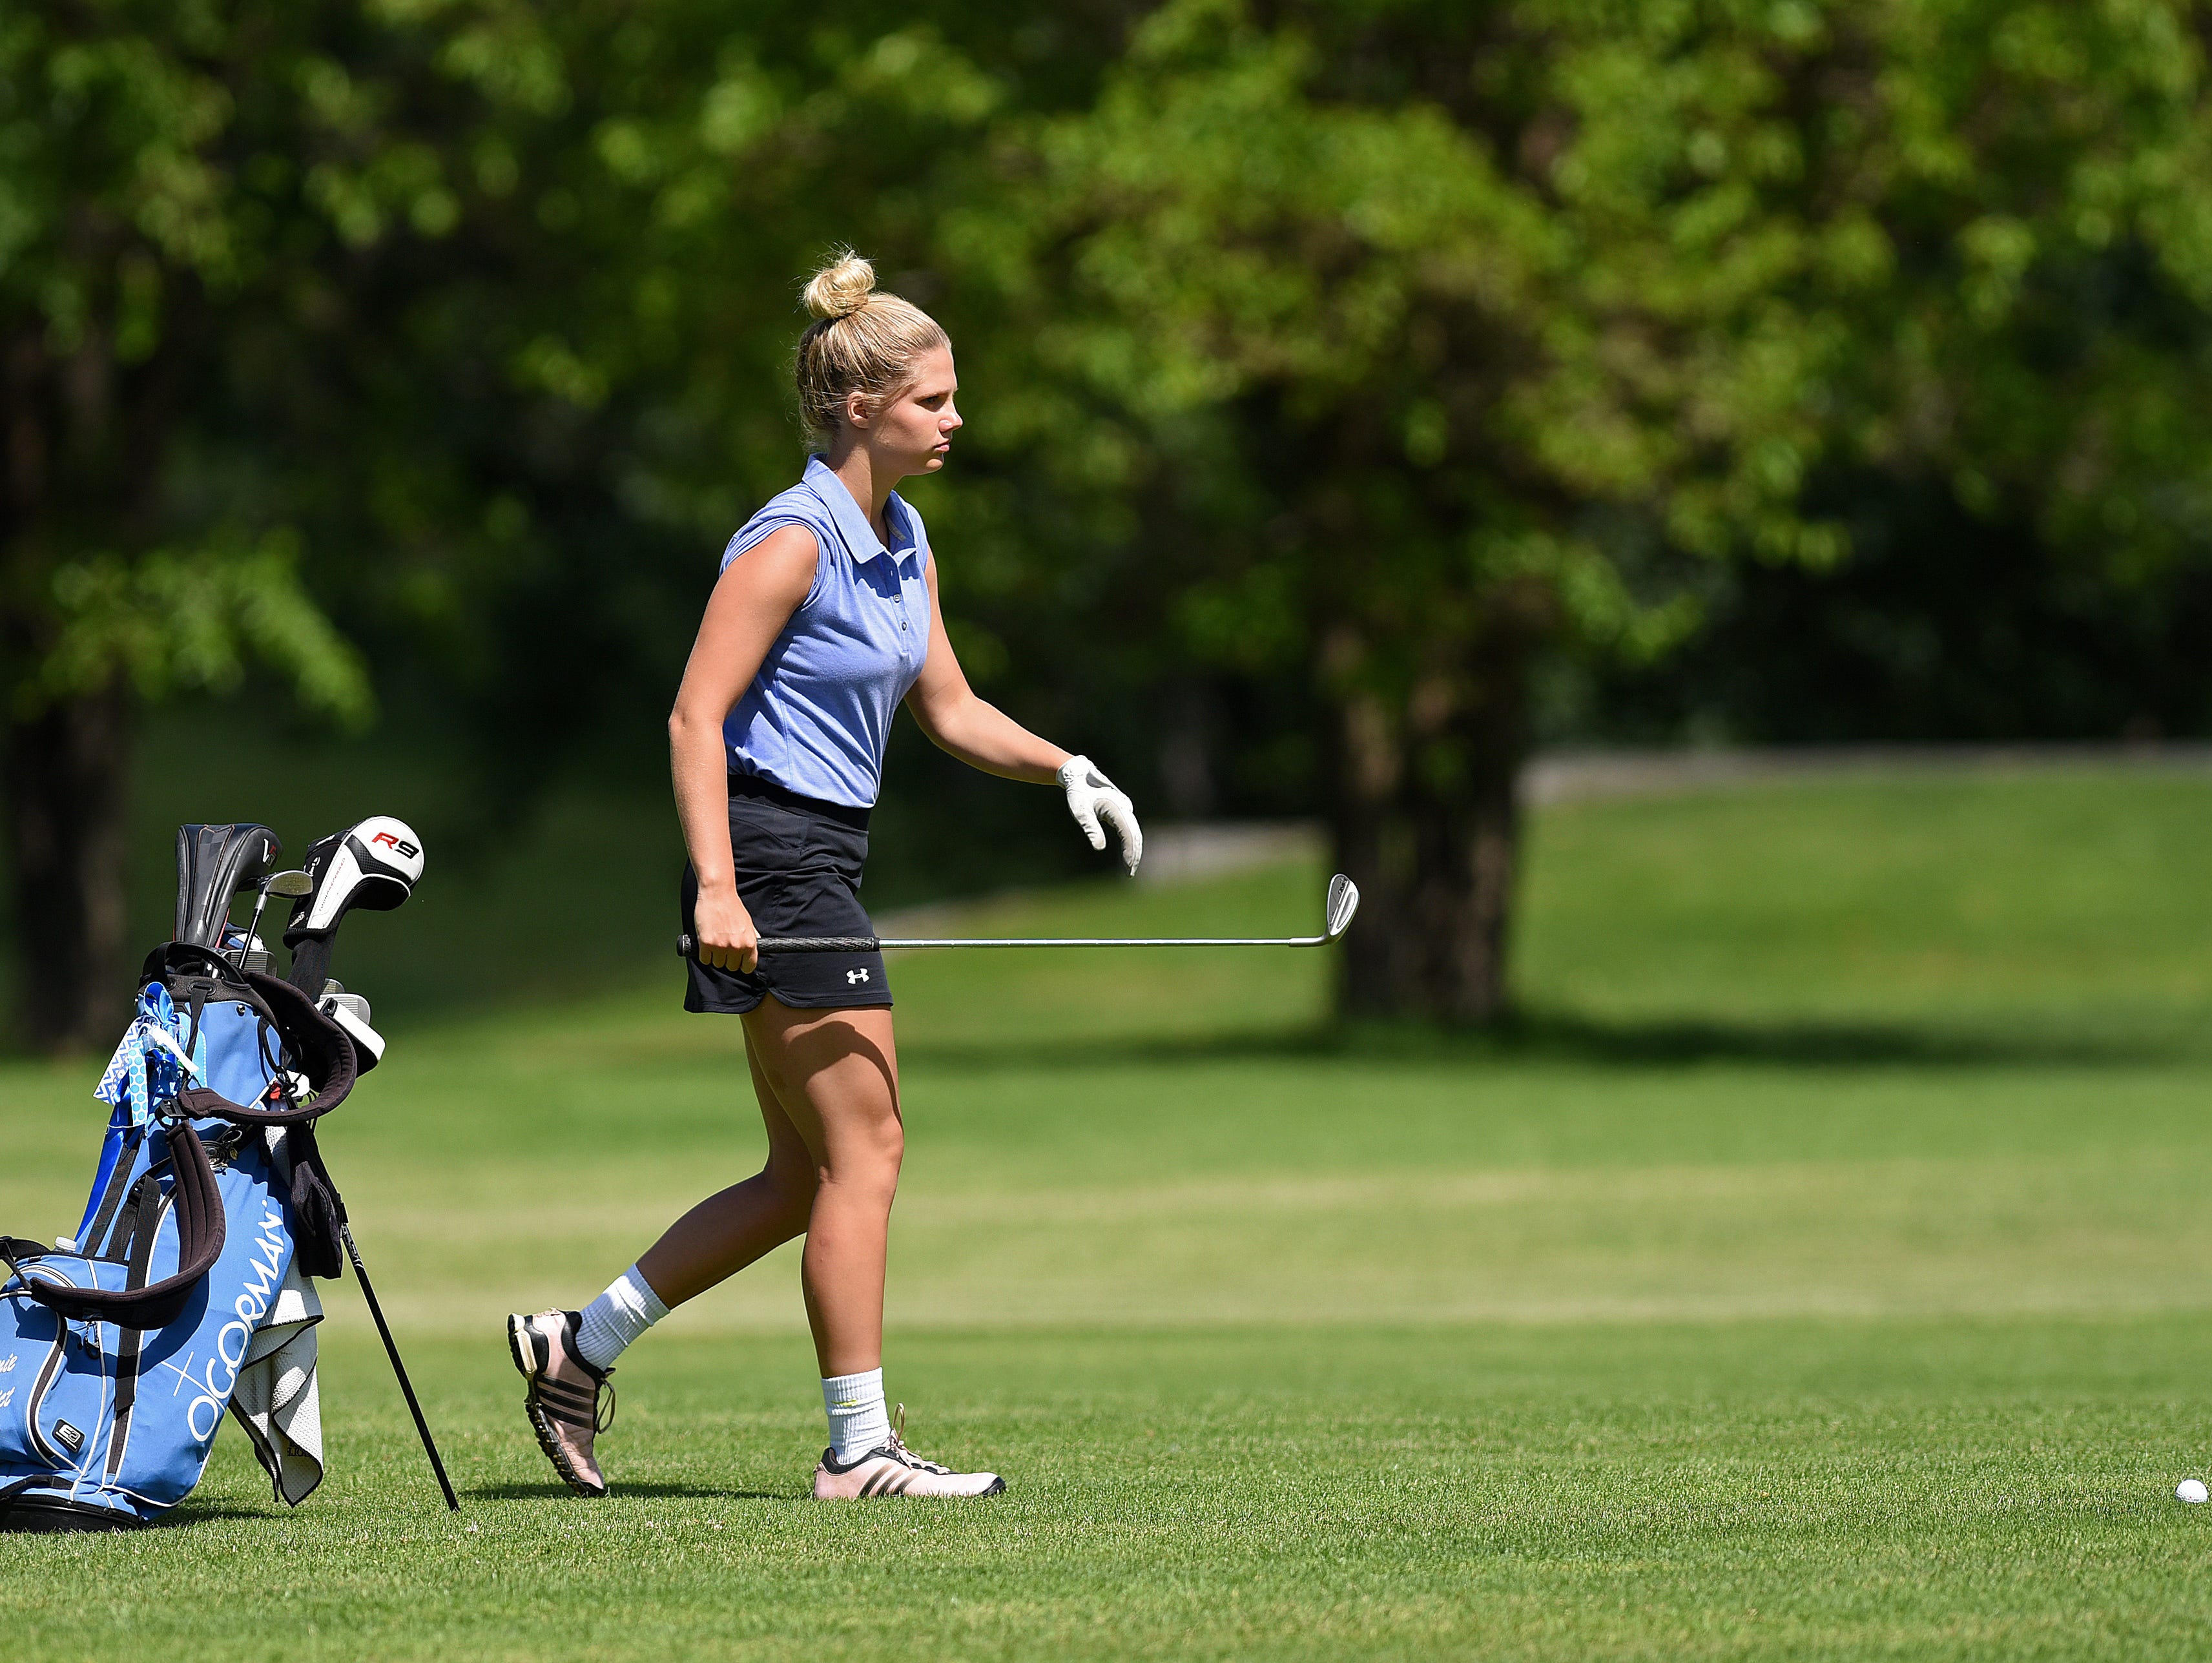 O'Gorman's Jamie Benedict golfs during the girls state golf tournament at Lakeview Golf Course in Mitchell, S.D., Tuesday, June 7, 2016.